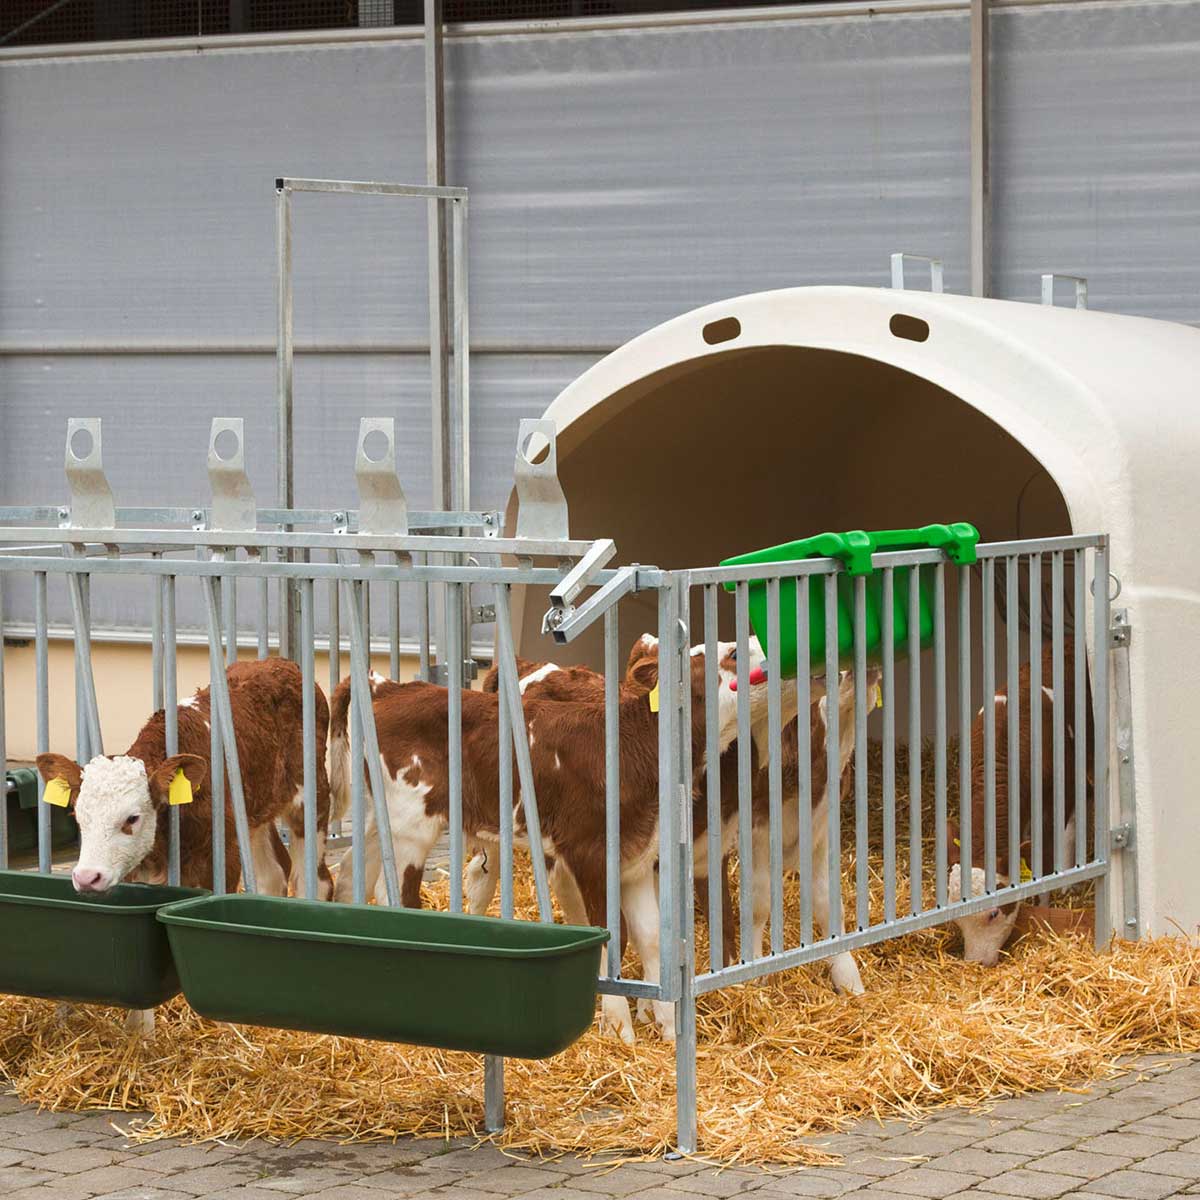 Calf Feeder Tray Multi Feeder with Valve 149 and Super Teat 147